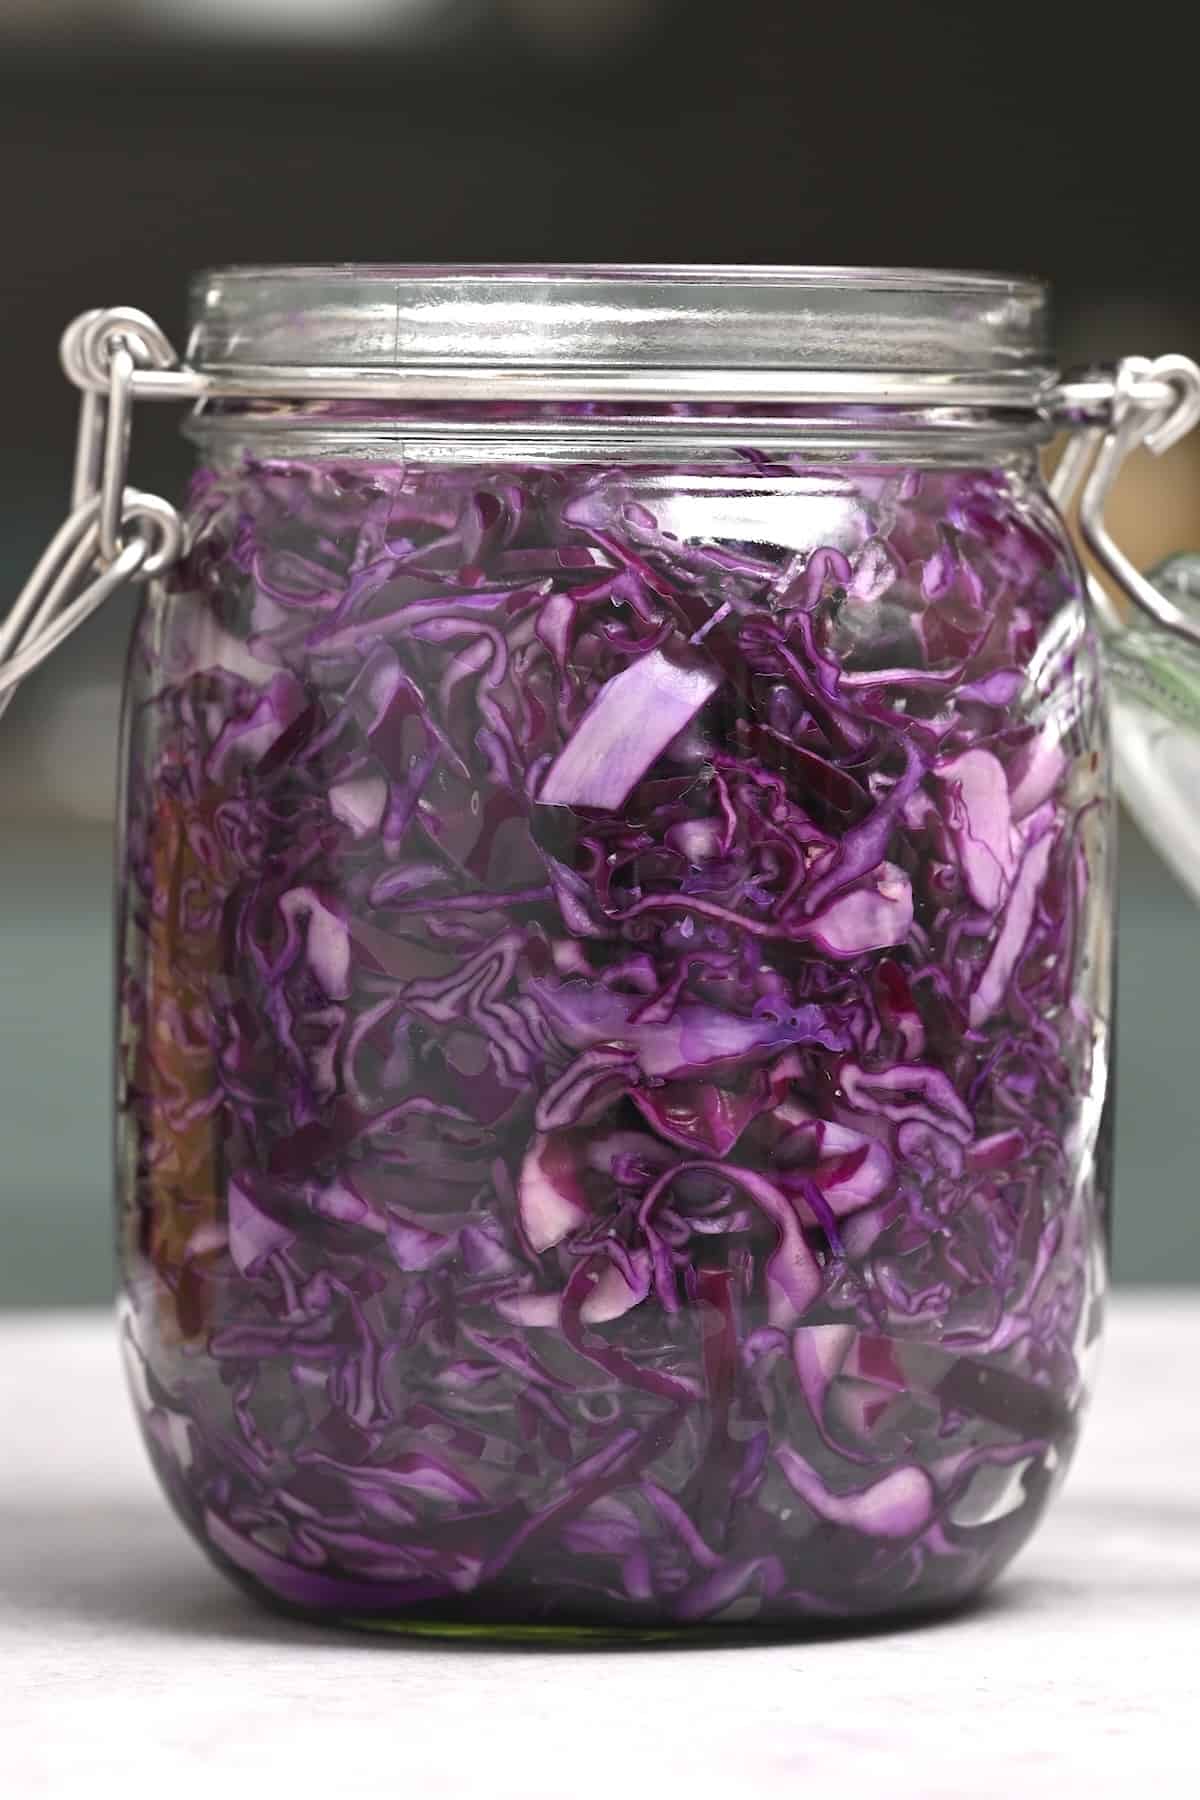 Shredded red cabbage in a jar